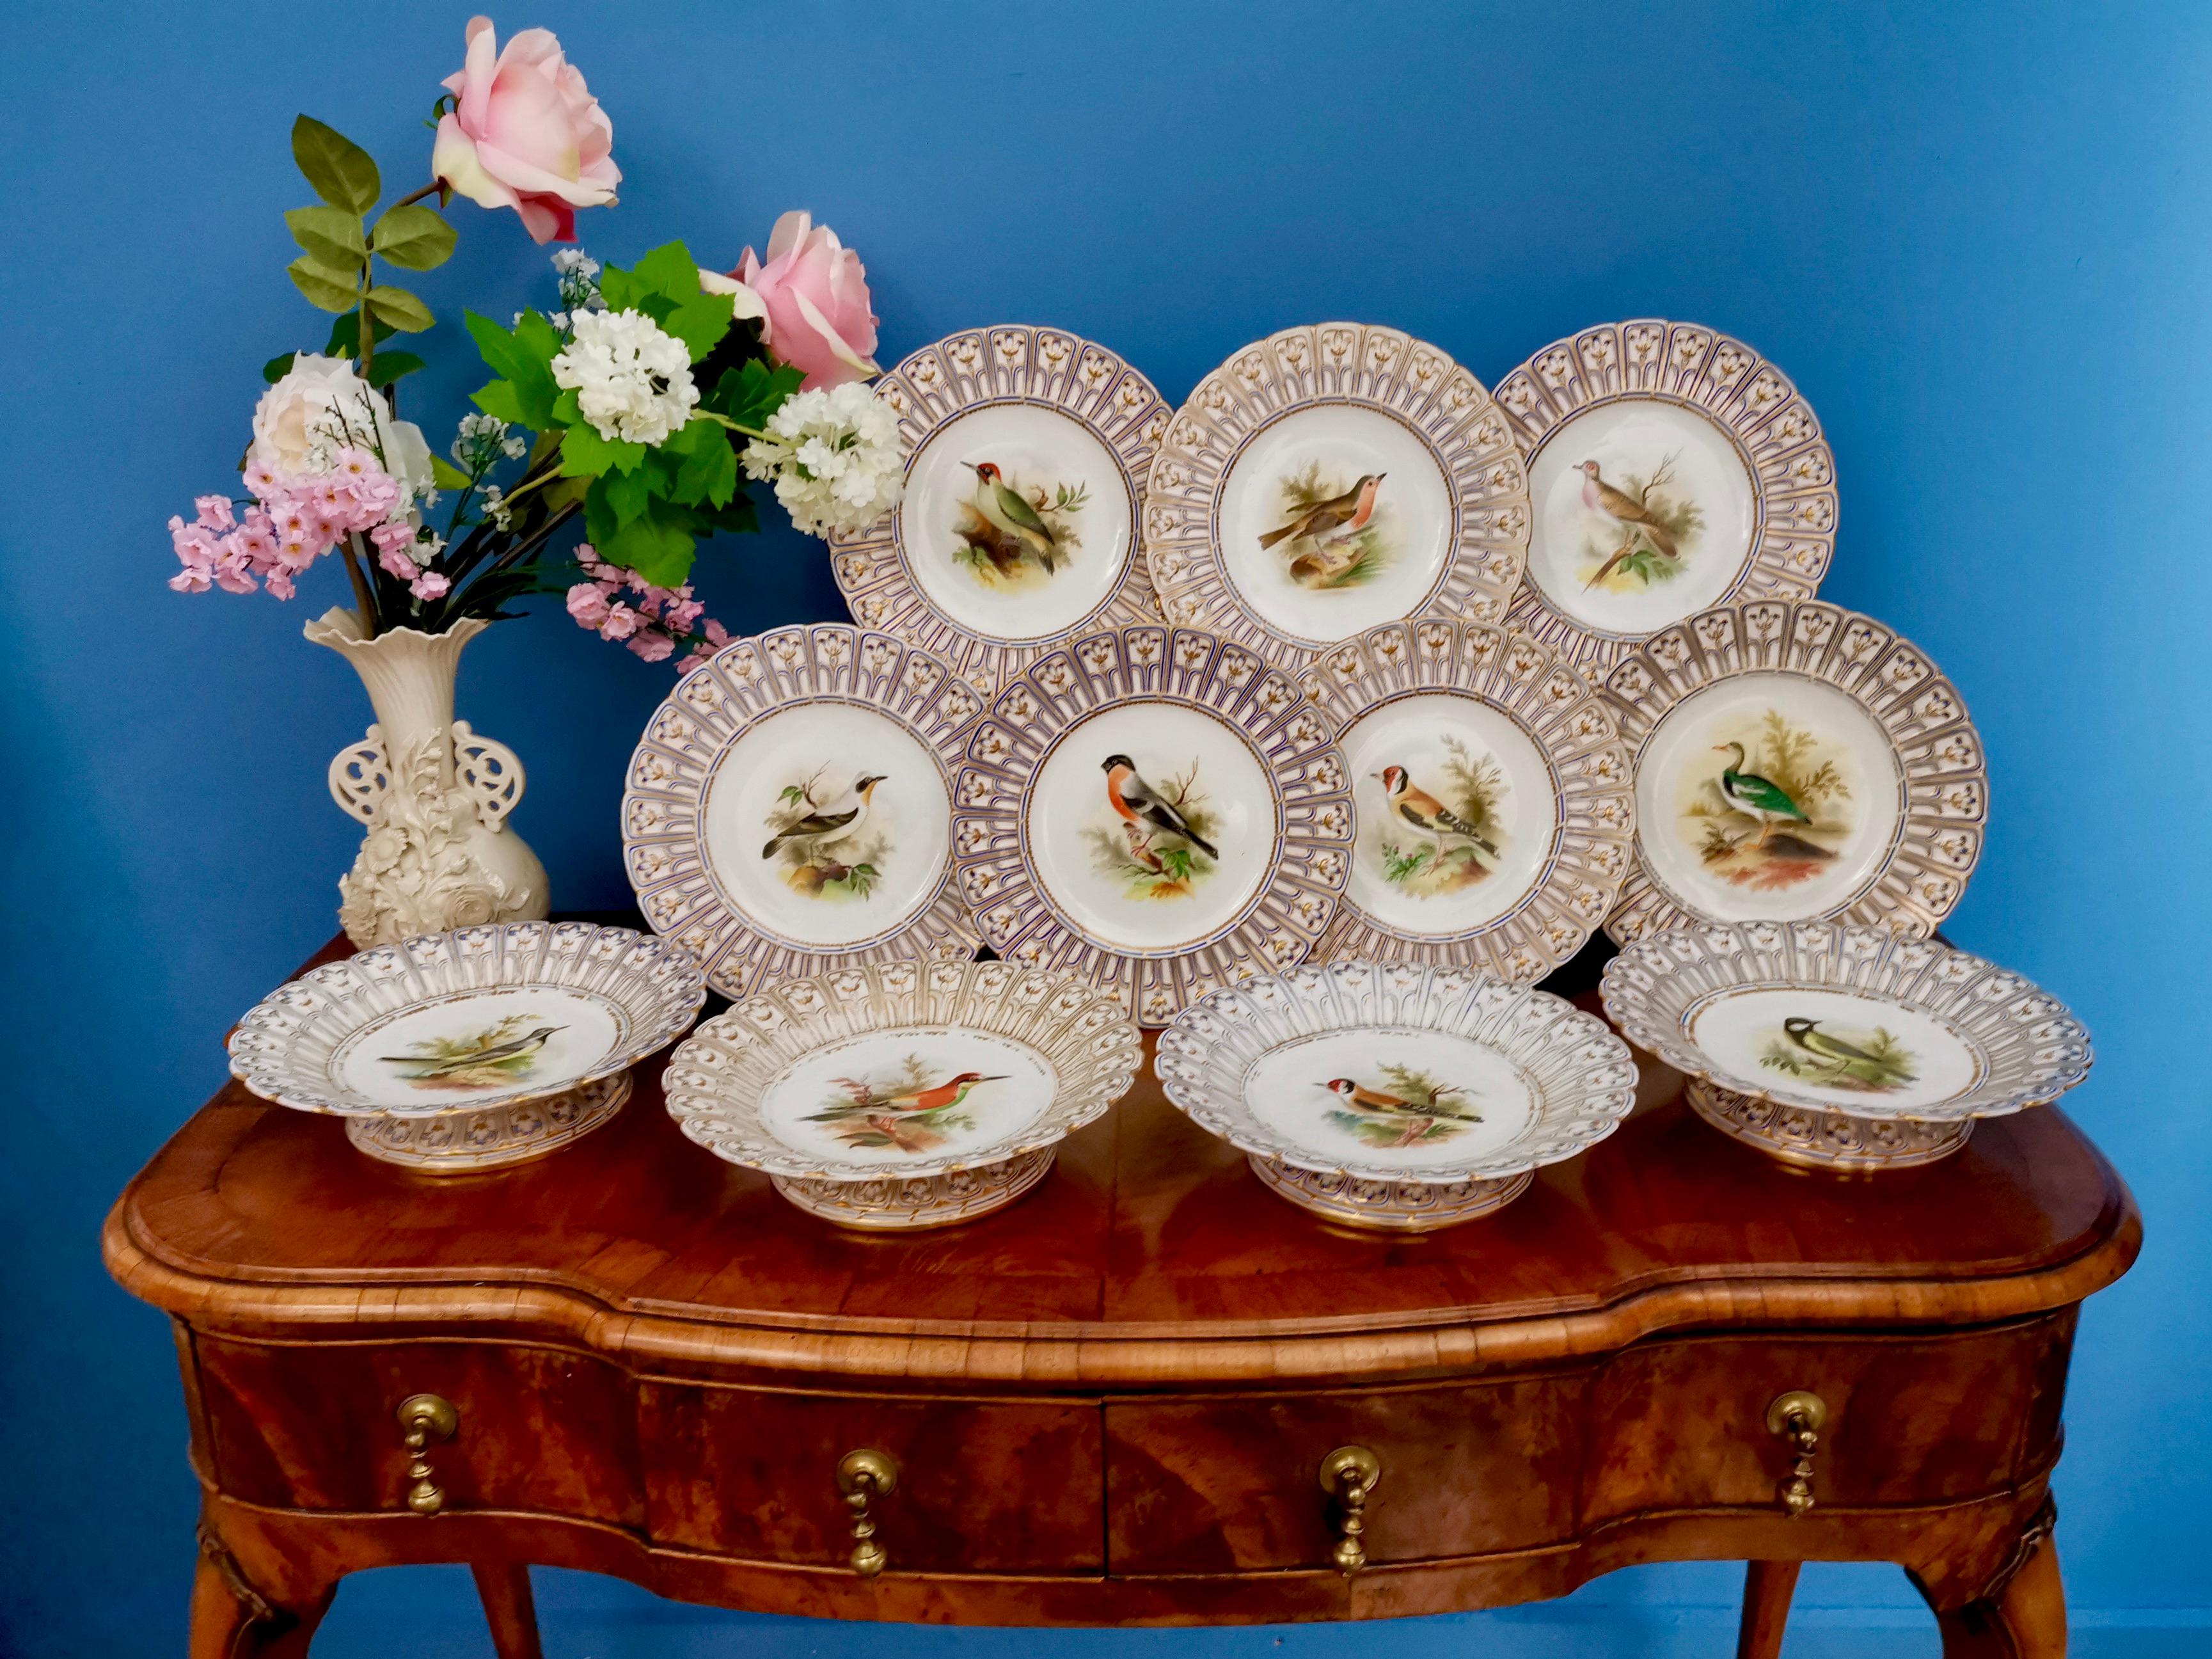 This is a stunning porcelain dessert service made by Minton in 1851, which was the Victorian era. It has hand painted named birds by the famous painter Joseph Smith, and a beautiful reticulated border called the 